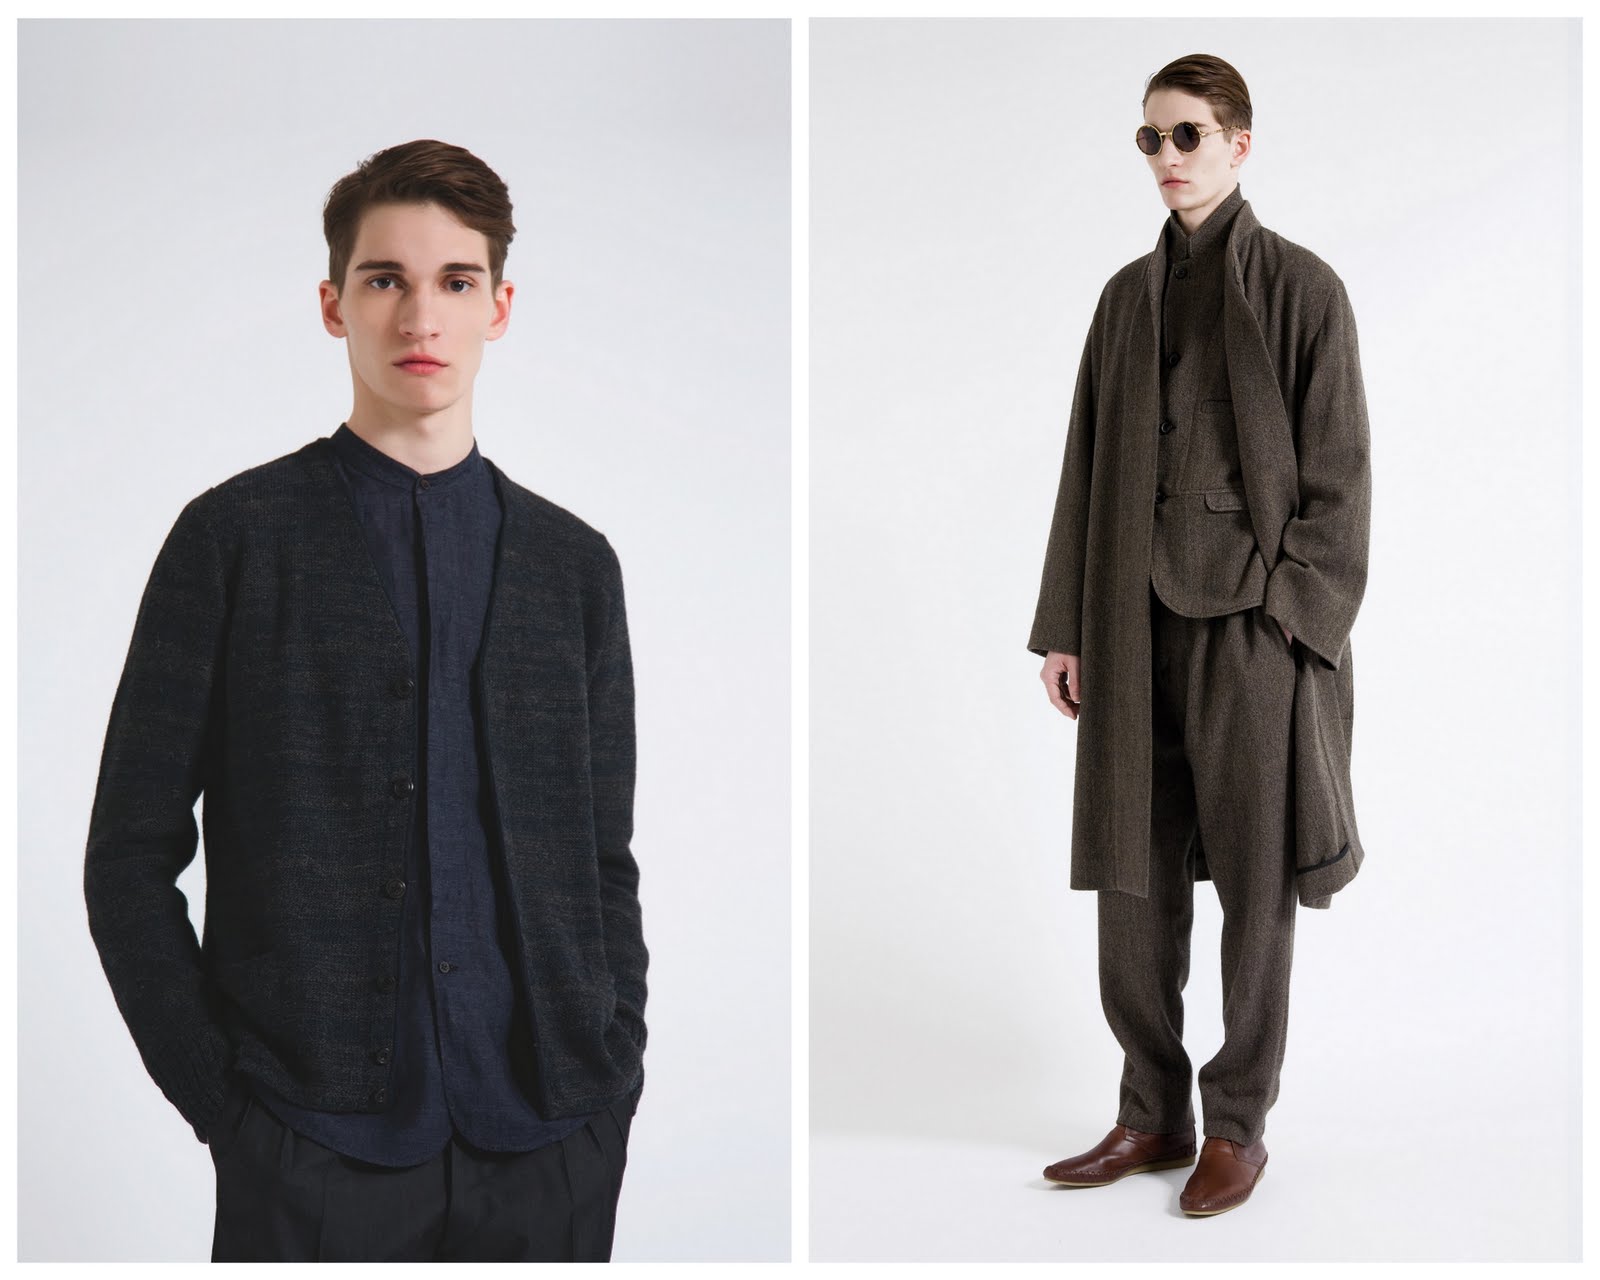 Style Salvage - A men's fashion and style blog.: Christophe Lemaire AW10